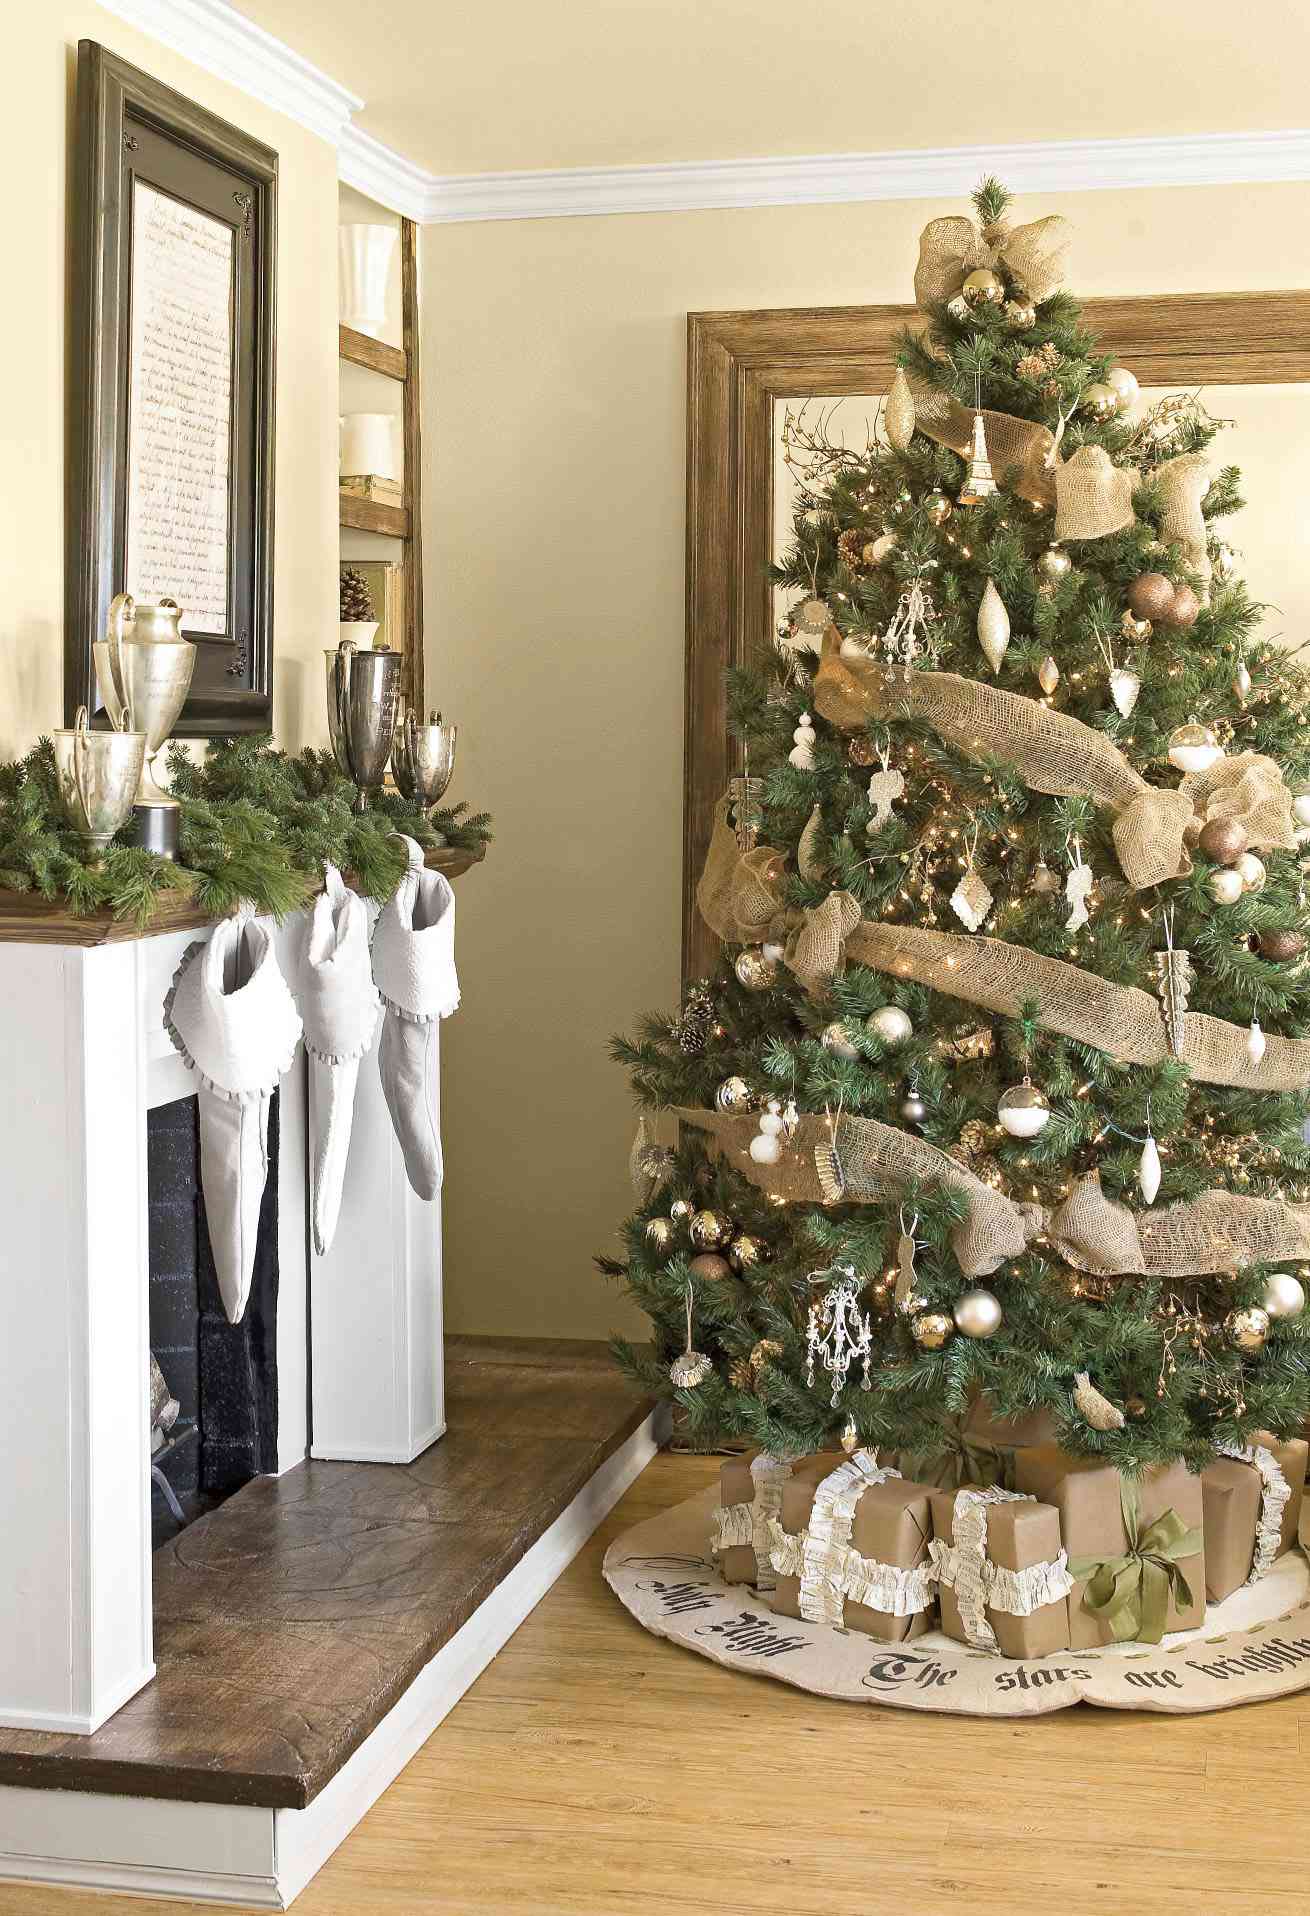 How To Wrap Christmas Tree Christmas Tree Decorating Ideas | Midwest Living